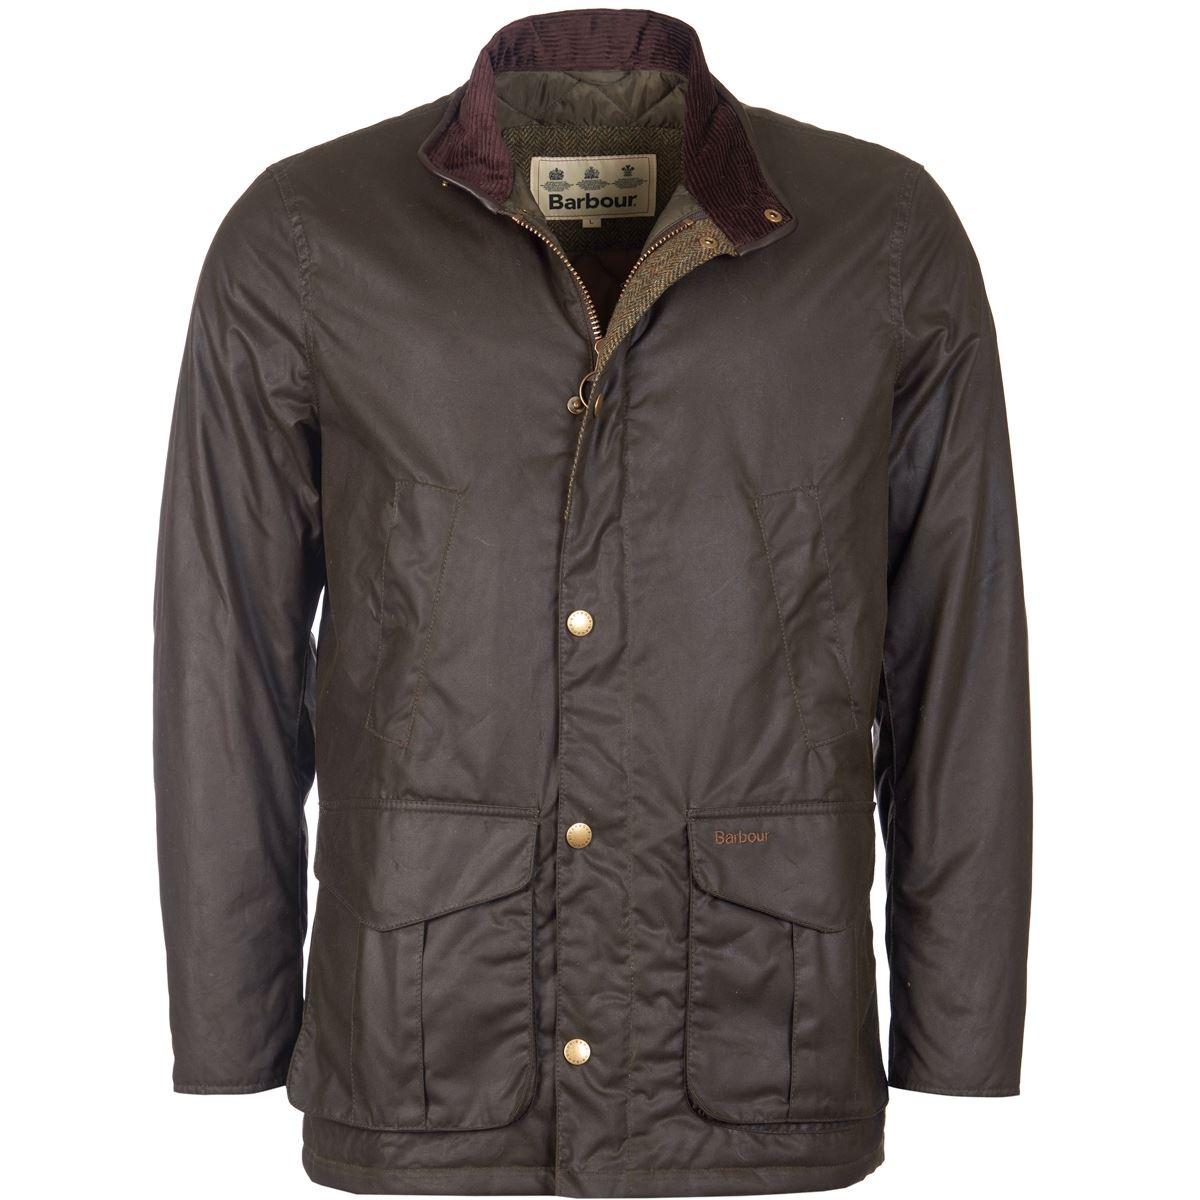 How does the Barbour Hereford jacket fasten?